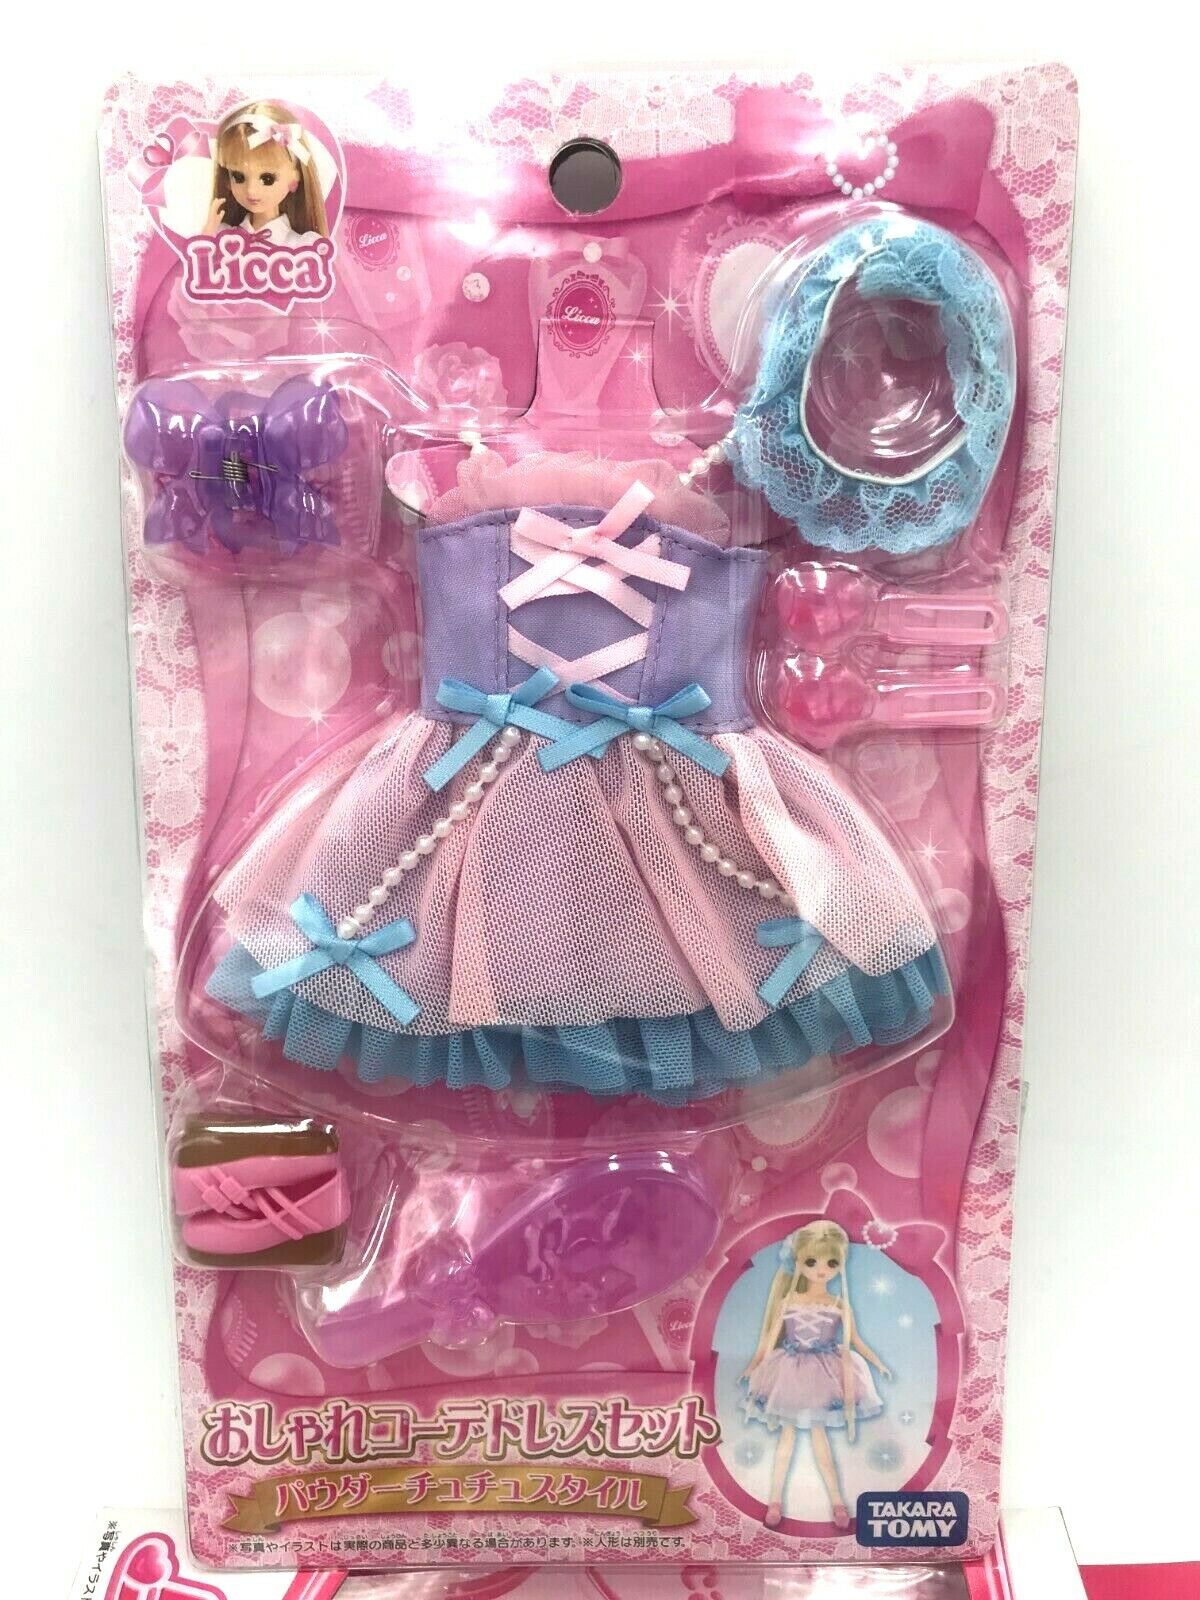 Takara TOMY Licca 9in Doll Clothes Accessories Ballet Dress Girl Gift (No Doll)